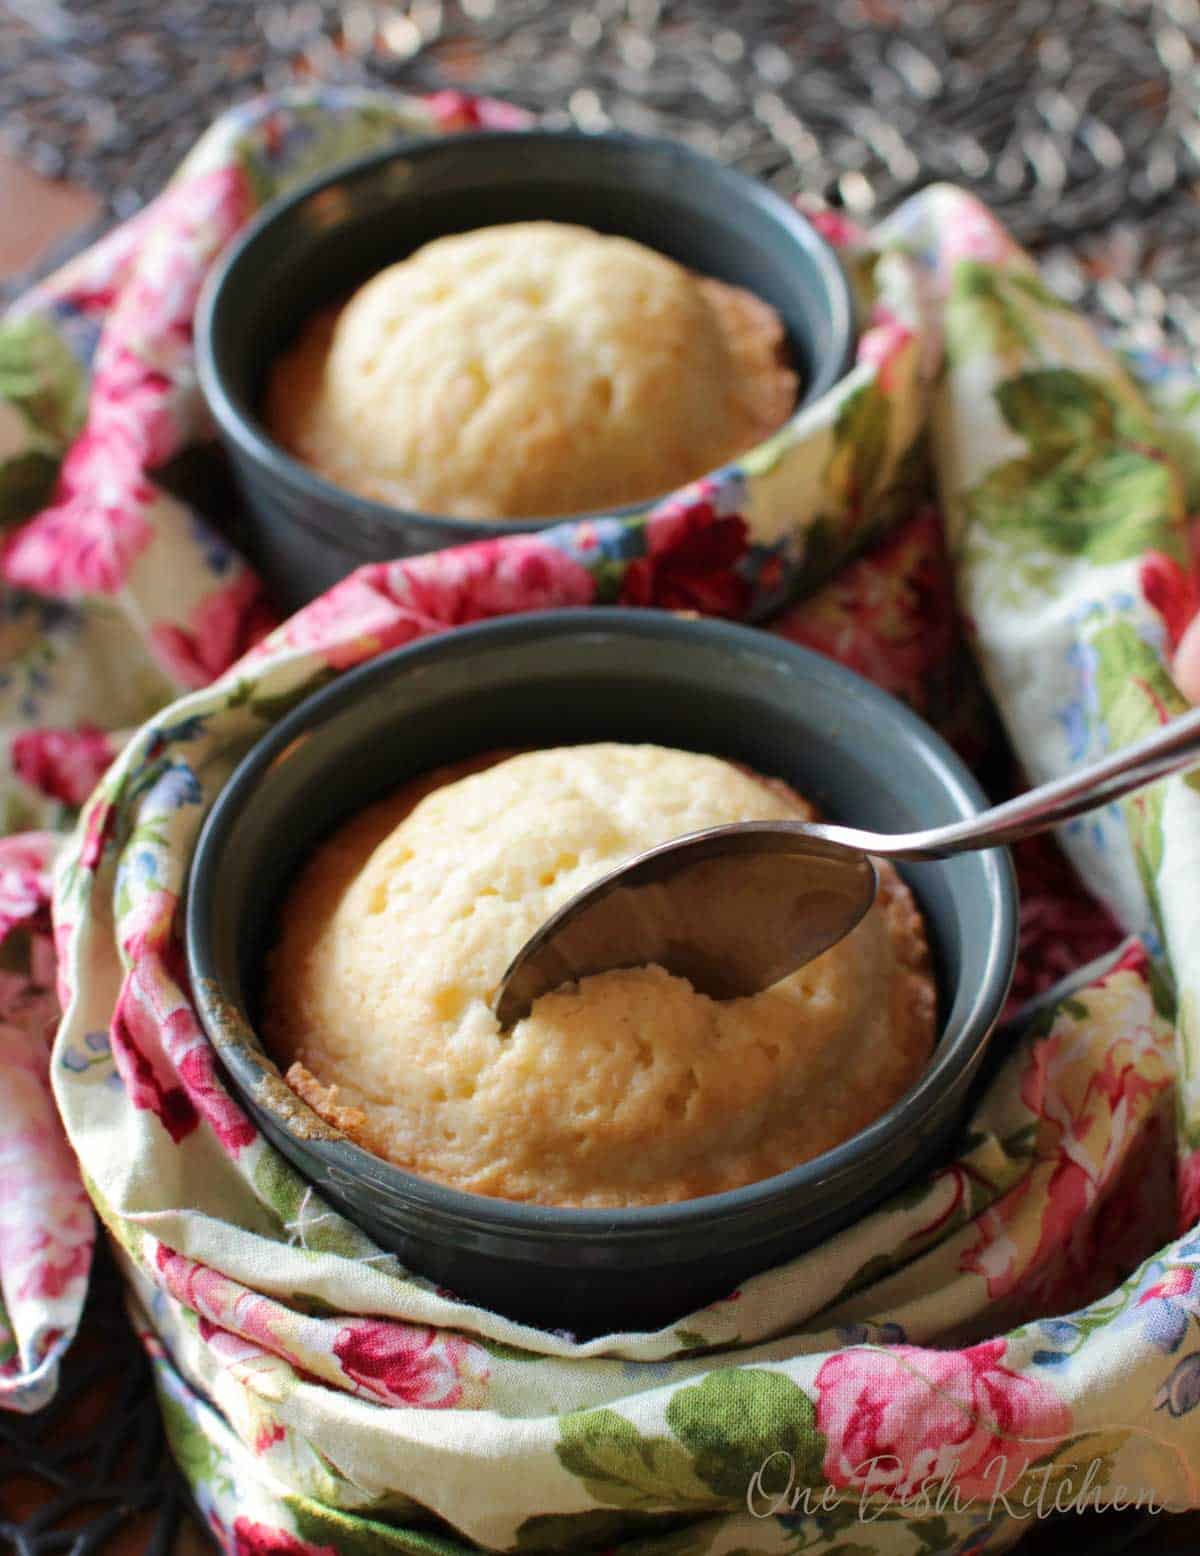 A spoon in a pound cake baked in a ramekin next to another pound cake in a ramekin all wrapped in a floral cloth napkin.